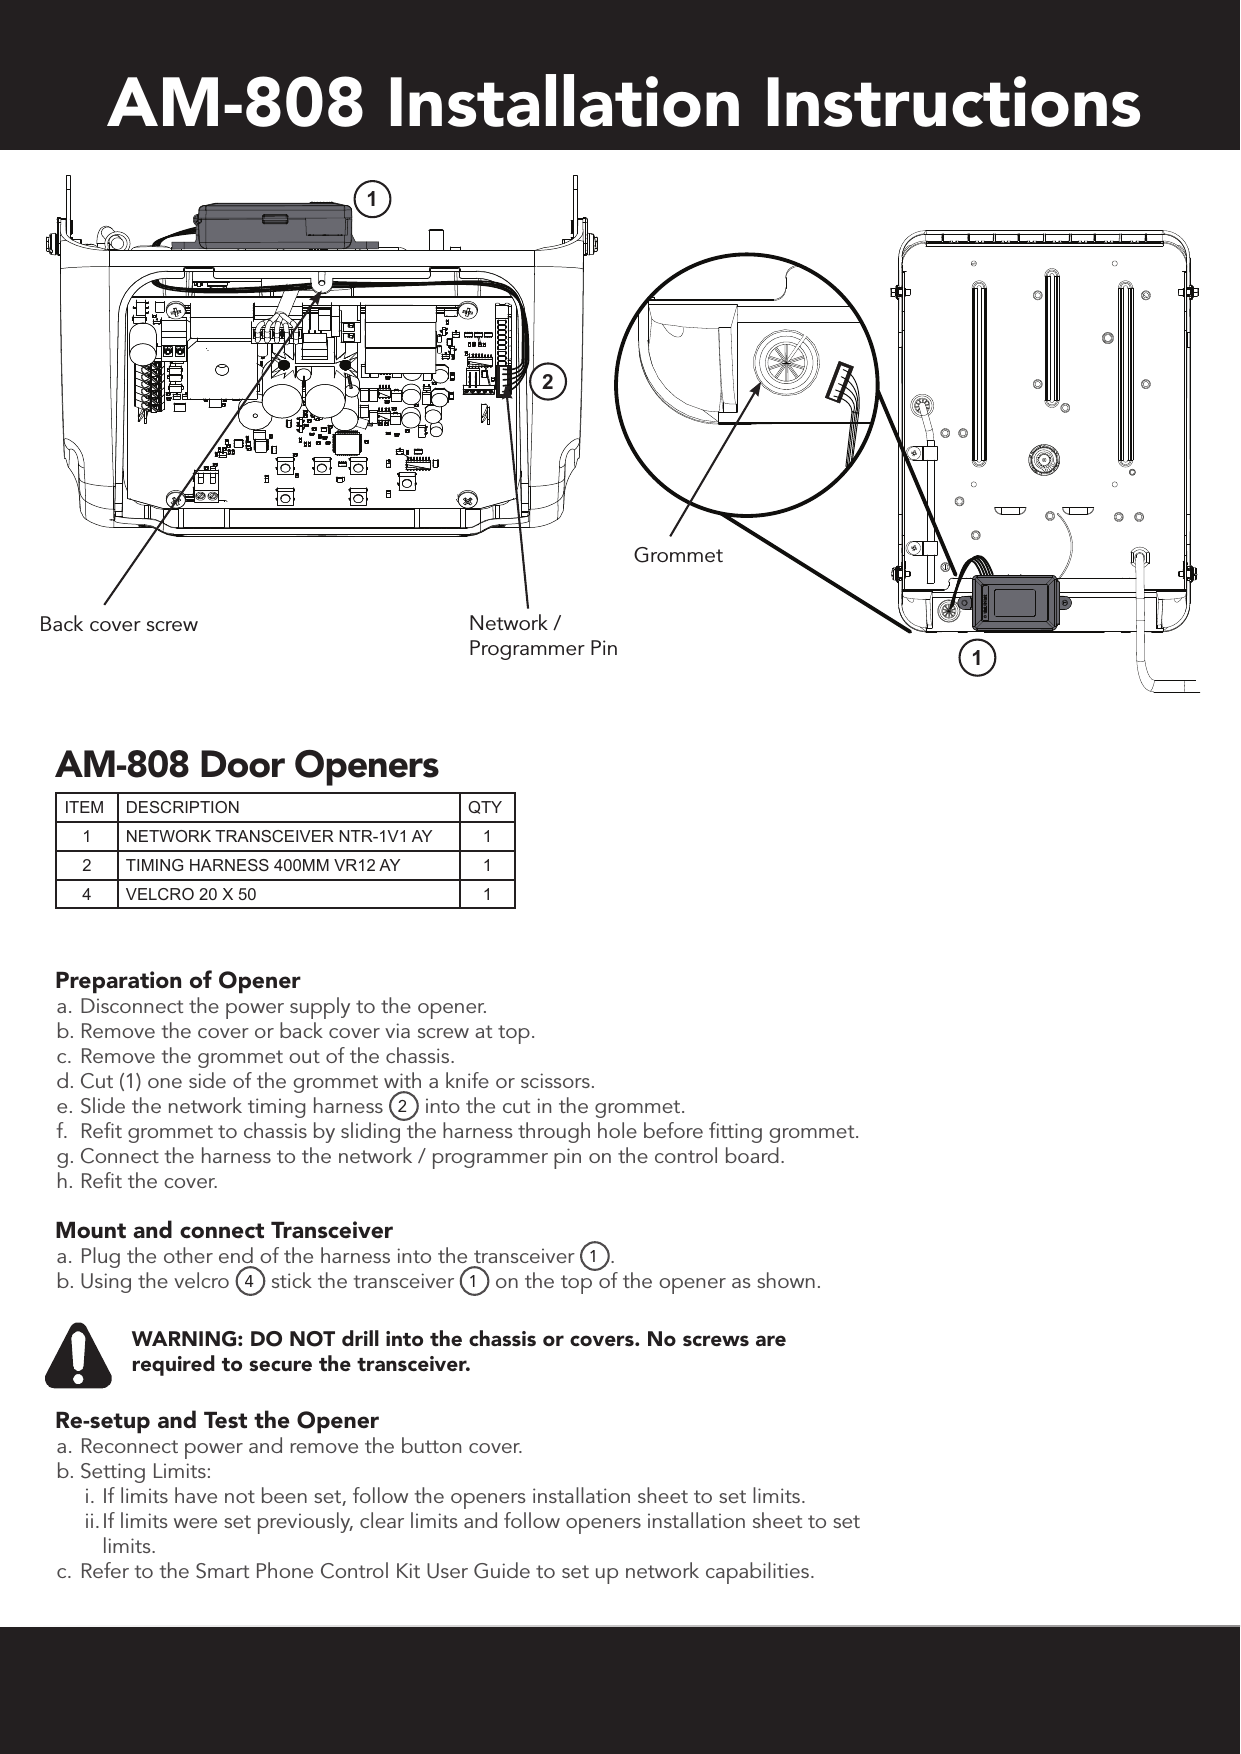 AM-808 Installation InstructionsPreparation of Opener a. Disconnect the power supply to the opener.b. Remove the cover or back cover via screw at top.c. Remove the grommet out of the chassis.d. Cut (1) one side of the grommet with a knife or scissors.e. Slide the network timing harness 2 into the cut in the grommet.f.  Refit grommet to chassis by sliding the harness through hole before fitting grommet.g. Connect the harness to the network / programmer pin on the control board.h. Refit the cover.Mount and connect Transceivera. Plug the other end of the harness into the transceiver 1.b. Using the velcro  4 stick the transceiver  1 on the top of the opener as shown. WARNING: DO NOT drill into the chassis or covers. No screws are required to secure the transceiver. Re-setup and Test the Openera. Reconnect power and remove the button cover.b. Setting Limits:i. If limits have not been set, follow the openers installation sheet to set limits. ii. If limits were set previously, clear limits and follow openers installation sheet to set limits.c. Refer to the Smart Phone Control Kit User Guide to set up network capabilities.Back cover screw Network /  Programmer PinGrommetITEM DESCRIPTION QTY1NETWORK TRANSCEIVER NTR-1V1 AY 12 TIMING HARNESS 400MM VR12 AY 14 VELCRO 20 X 50 1AM-808 Door Openers121